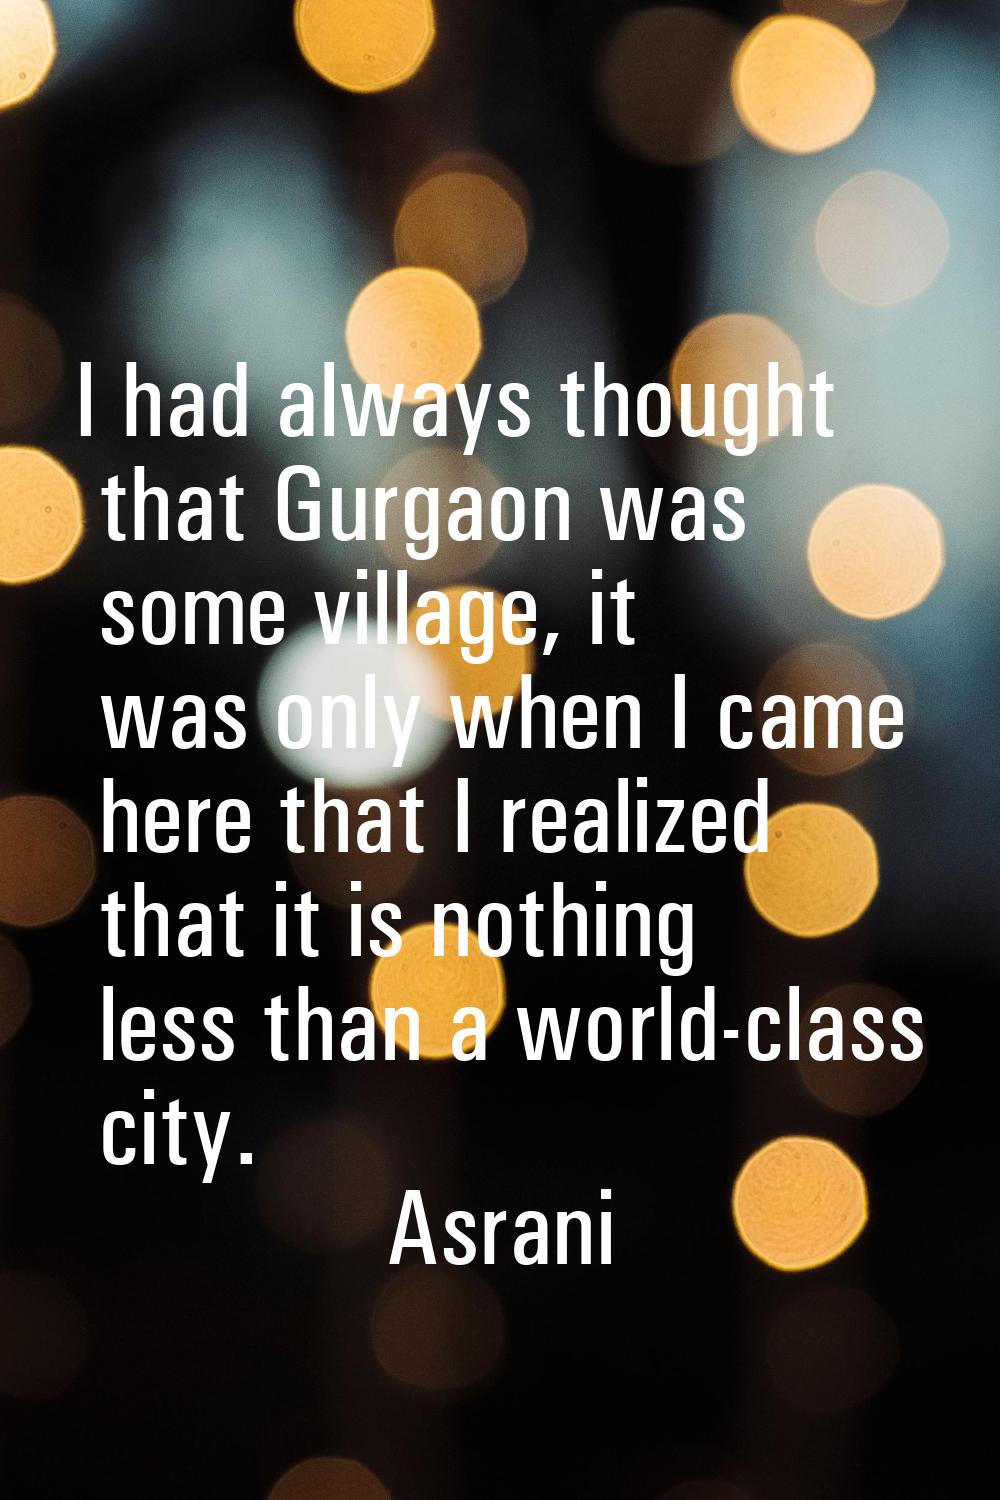 I had always thought that Gurgaon was some village, it was only when I came here that I realized th